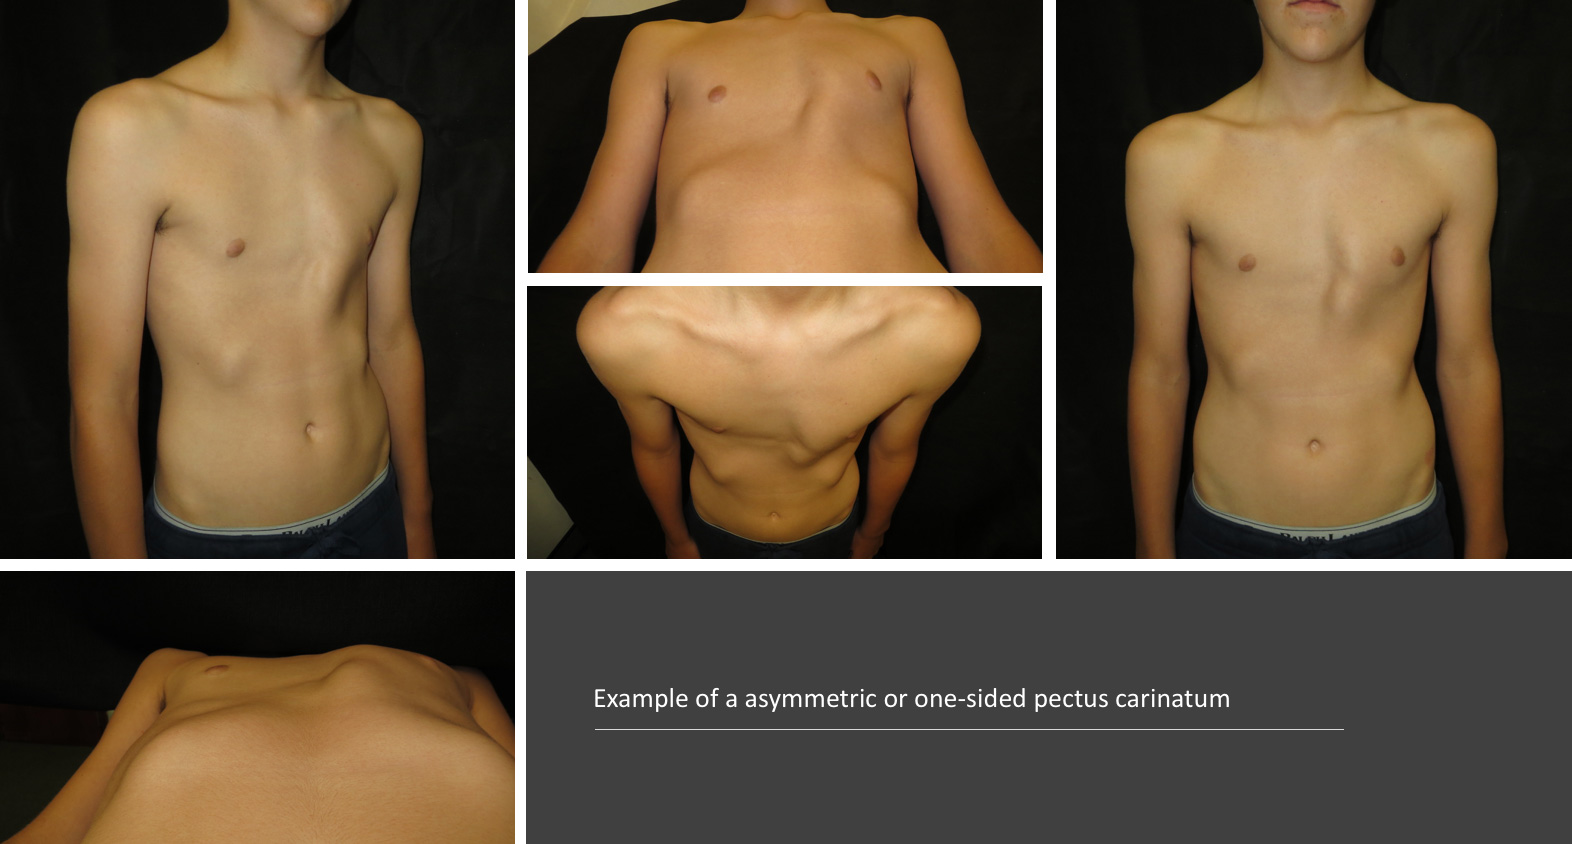 Example of a asymmetric or one-sided pectus carinatum